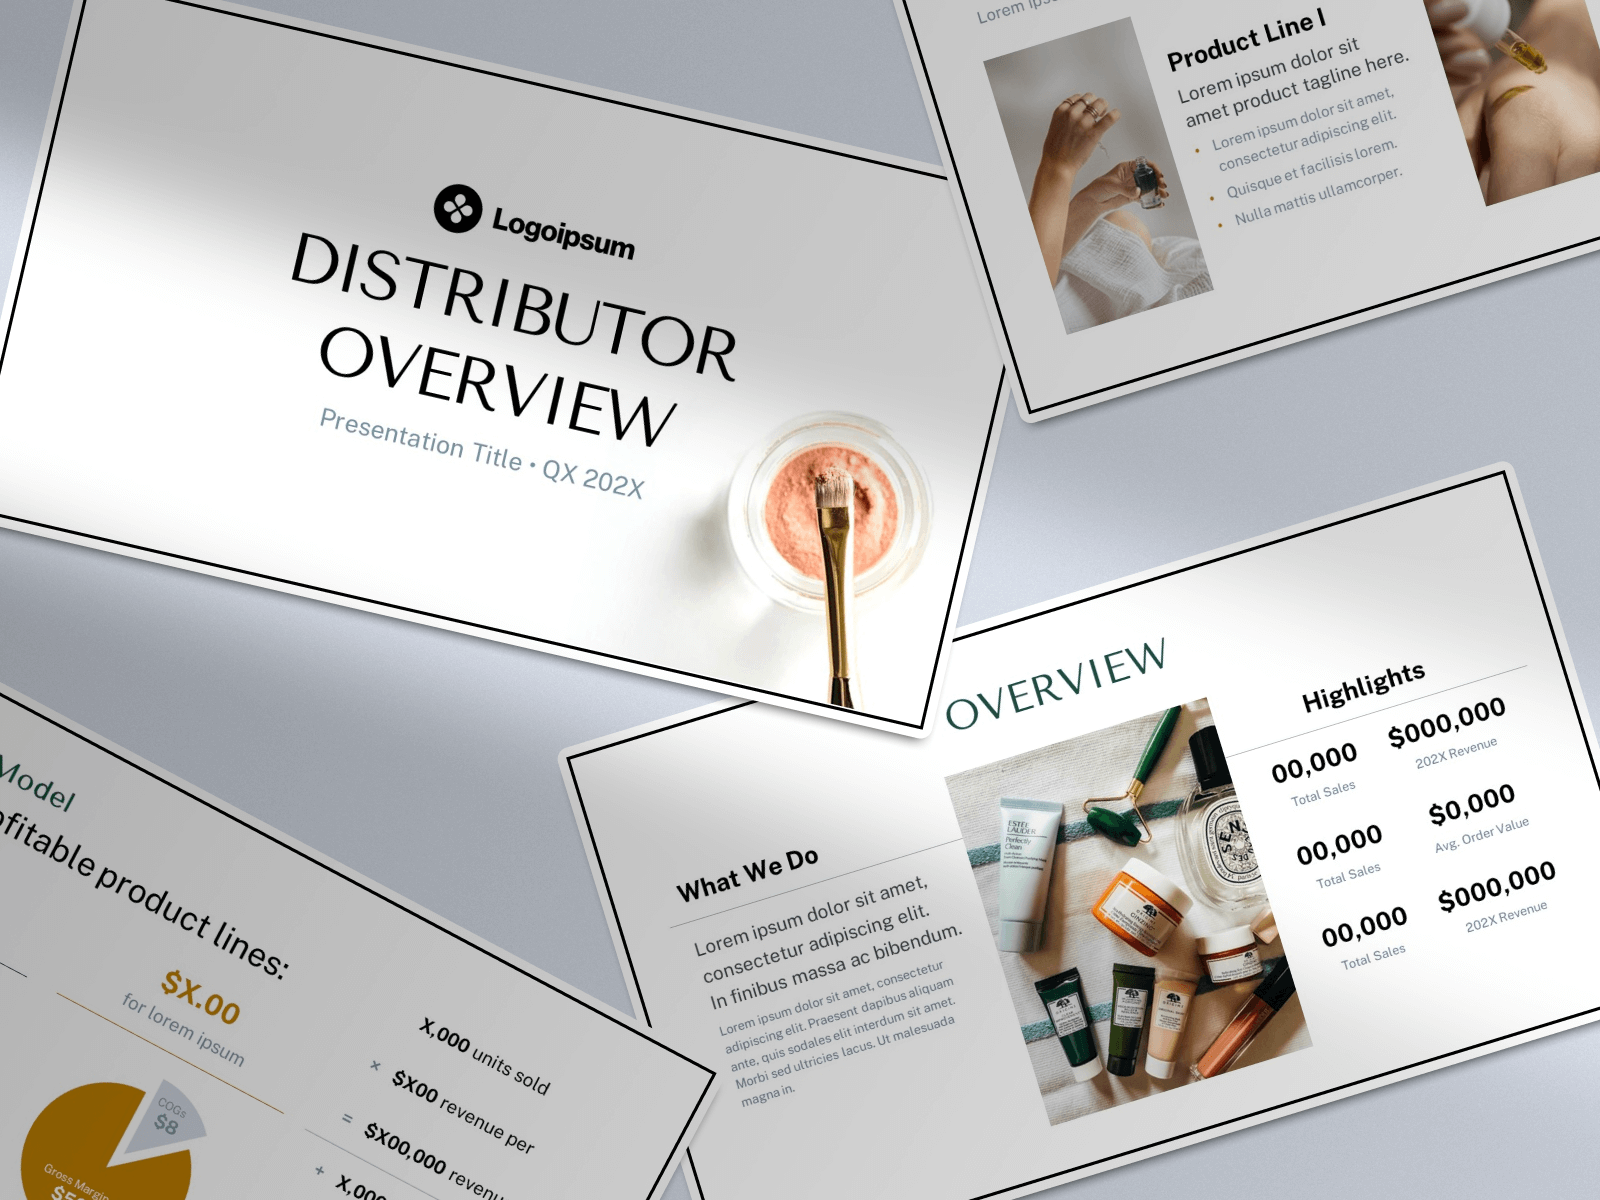 How to create a retailer / distributor pitch deck